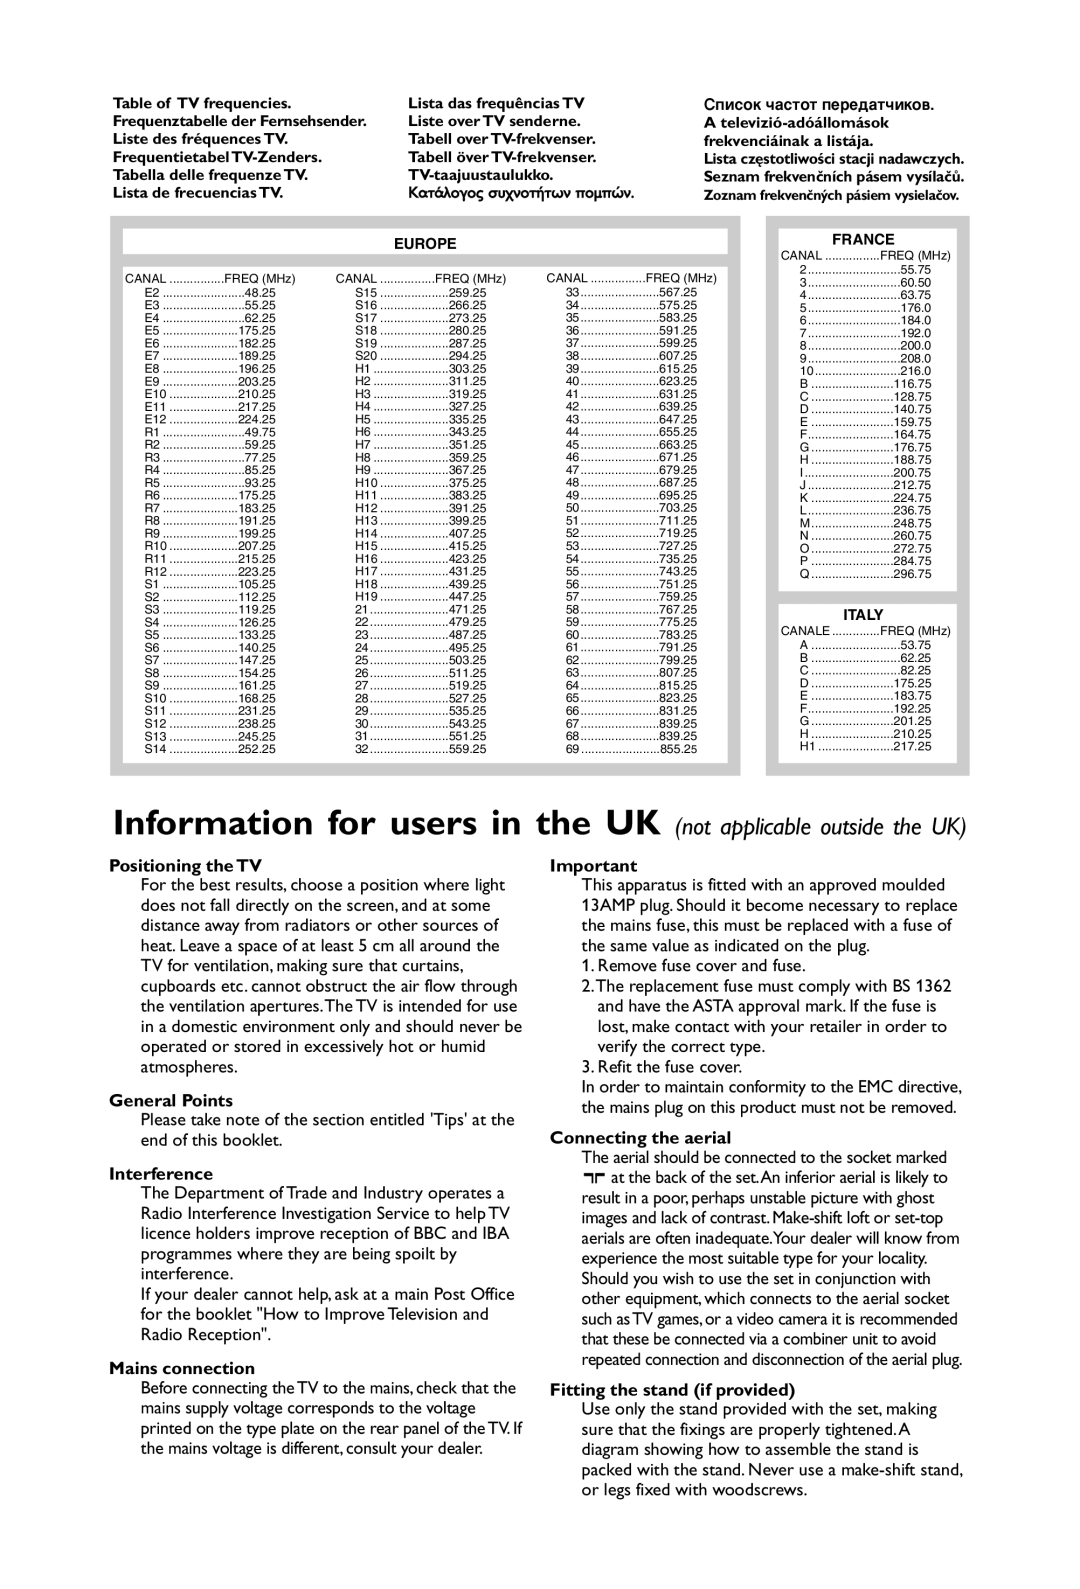 Philips 23PF4321 manual Information for users in the UK not applicable outside the UK, Positioning the TV, General Points 